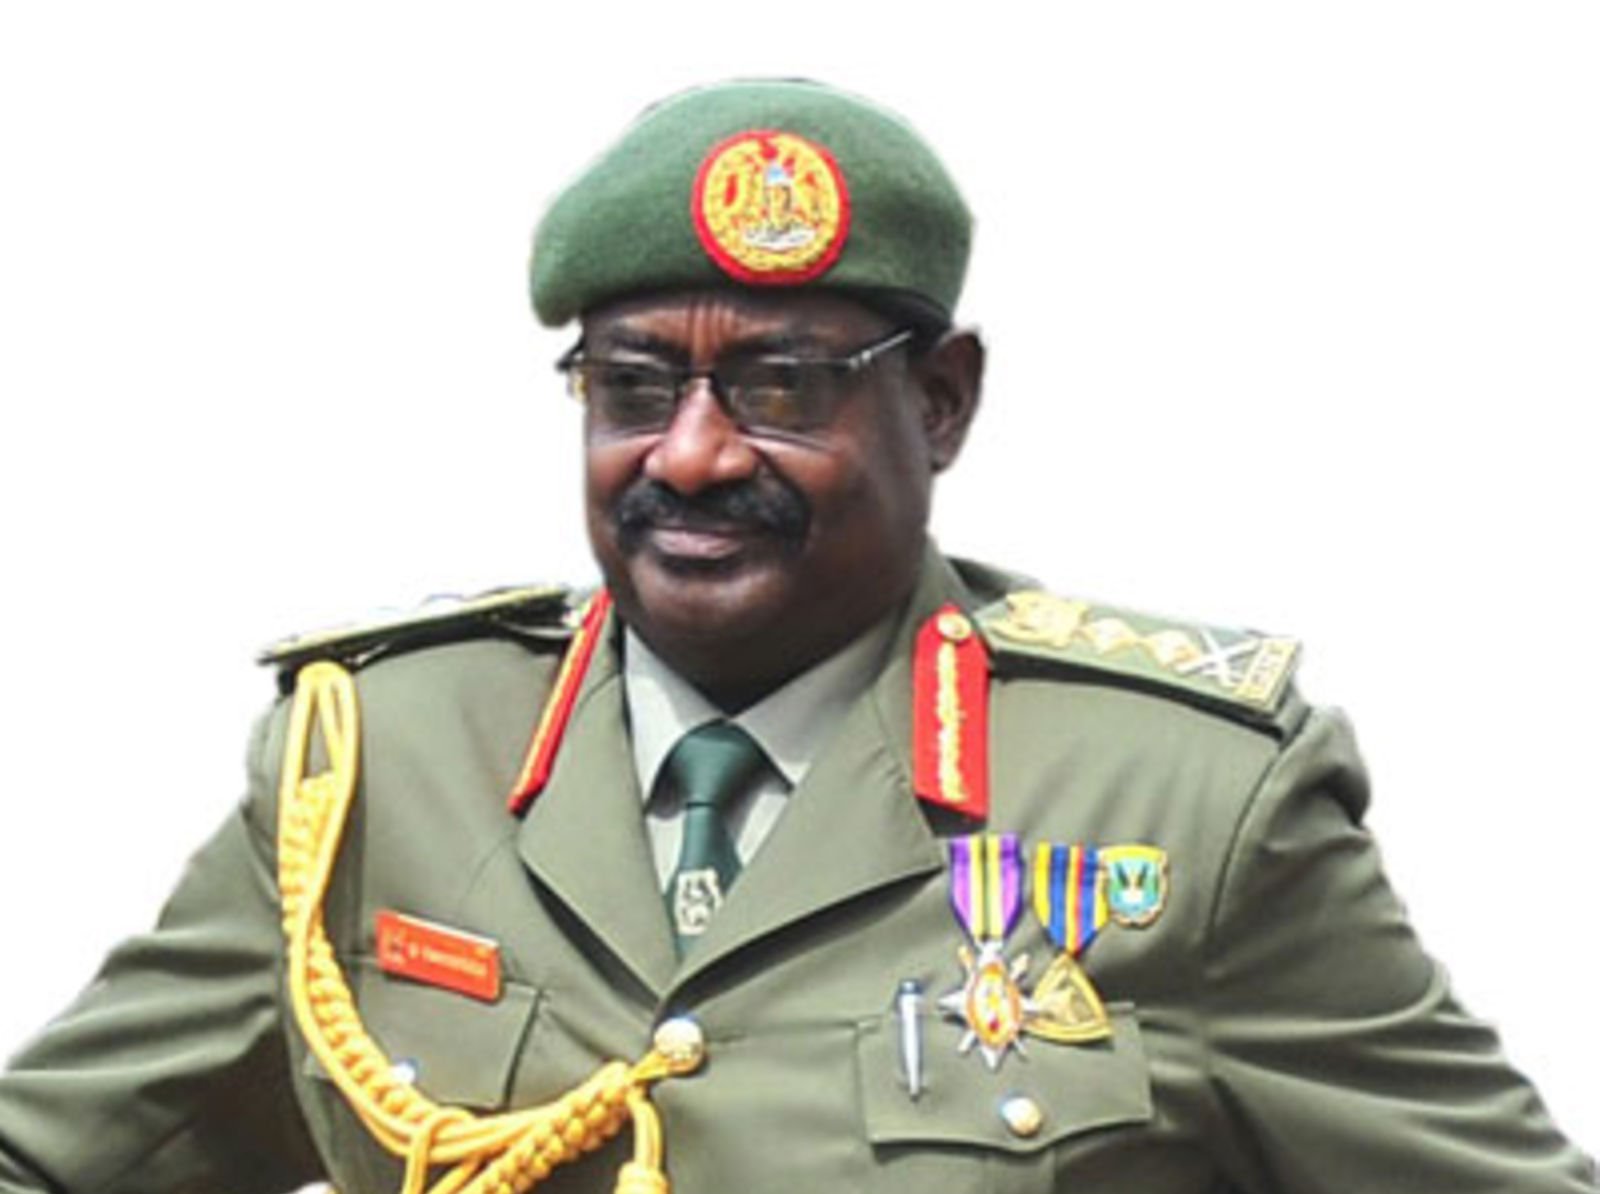 VIDEO: Watch Top UPDF General Make Shocking Revelations about Fear of Being Poisoned in Cabinet Meetings, High Command, Parliament